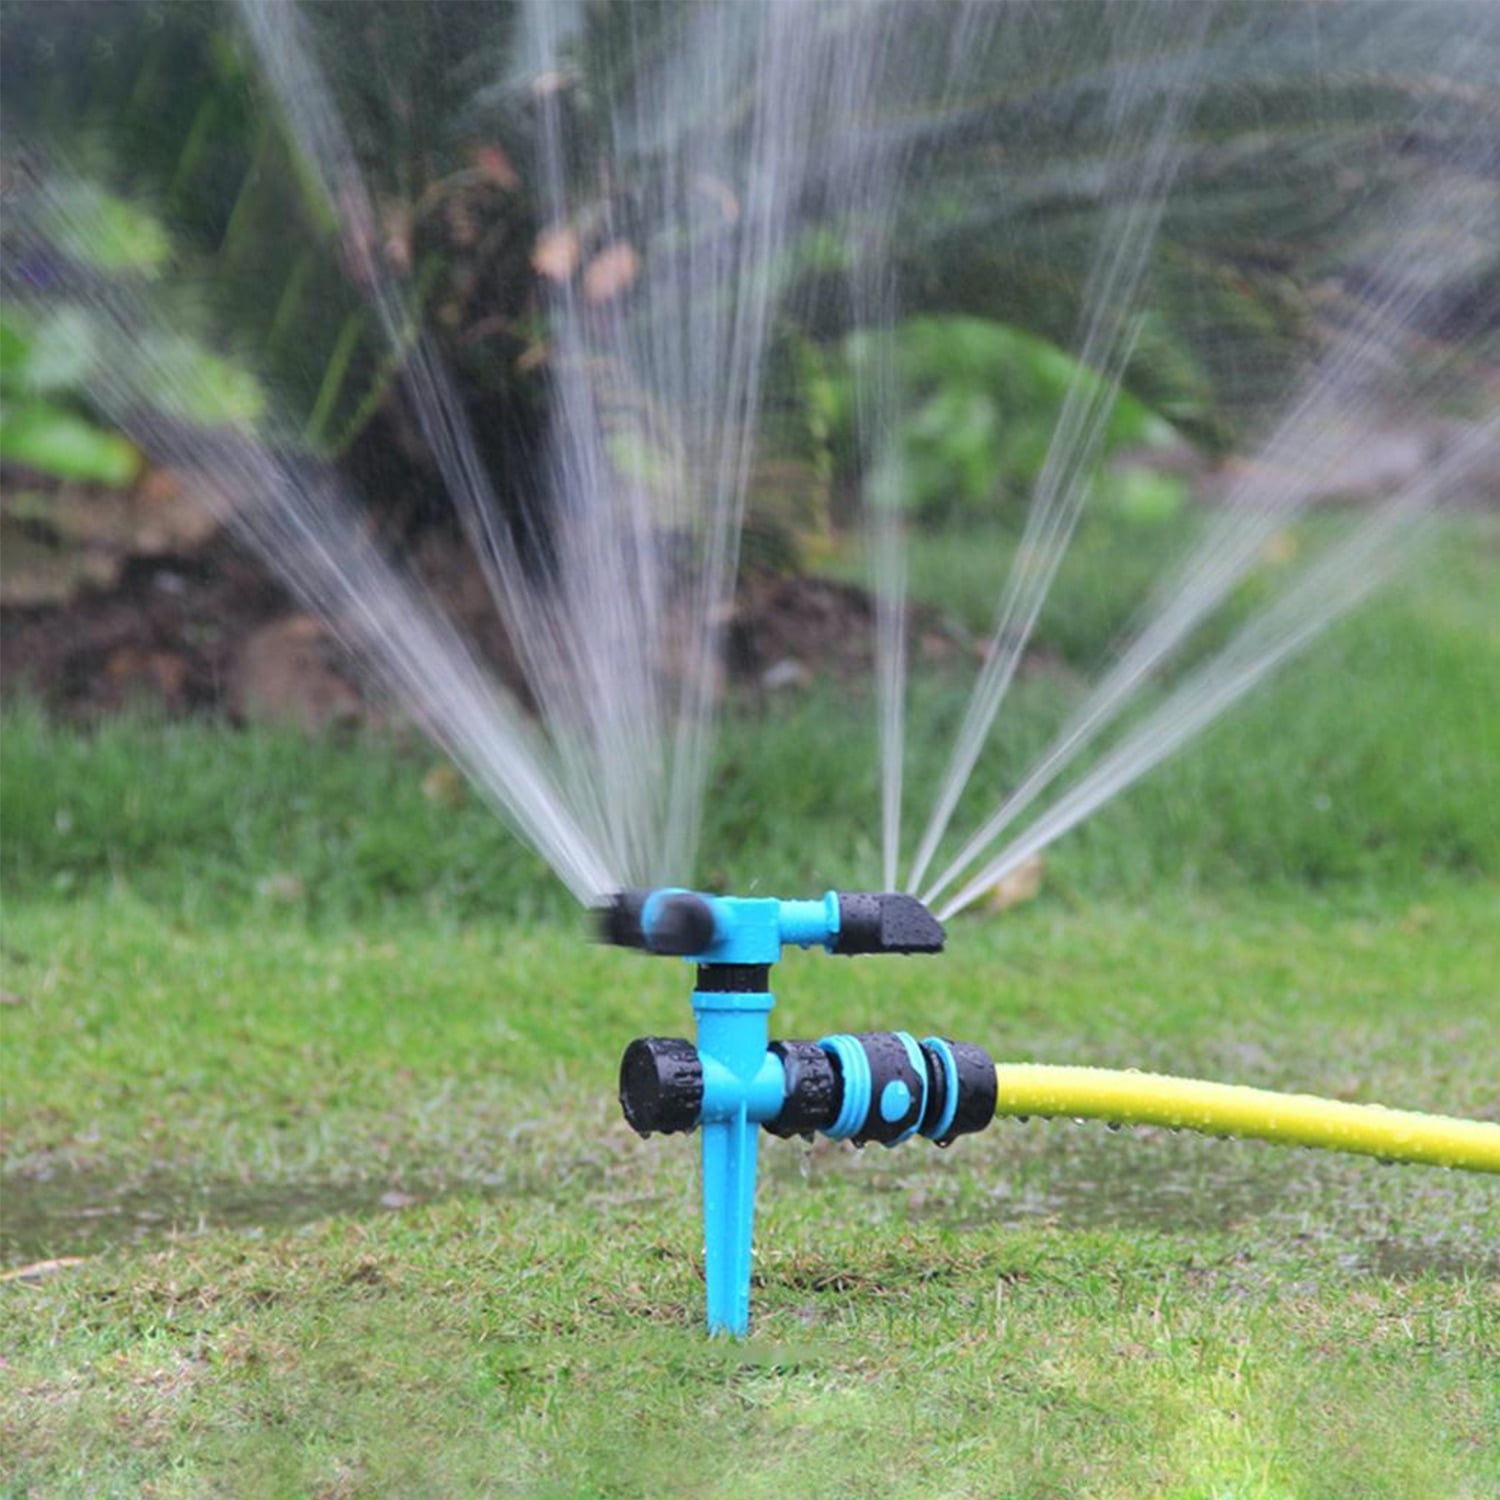 Details about   Auto Oscillating Sprinkler Watering System Garden Lawn Agriculture Irrigation 